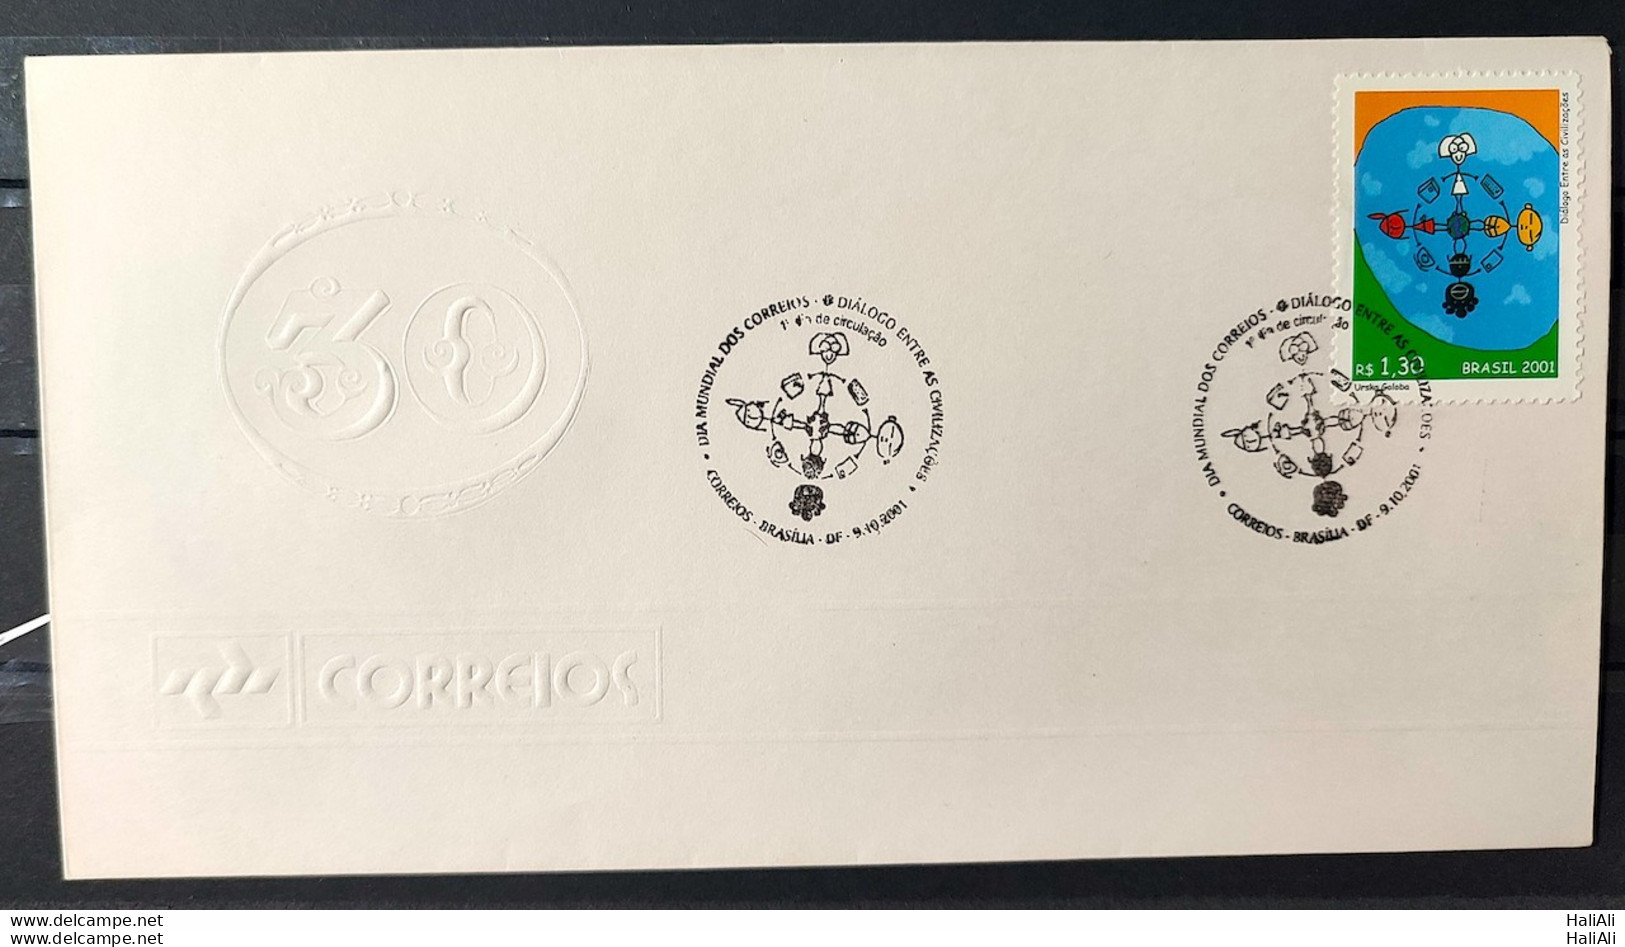 Envelope PVT 000 2001 World Post Day CBC BSB - FDC